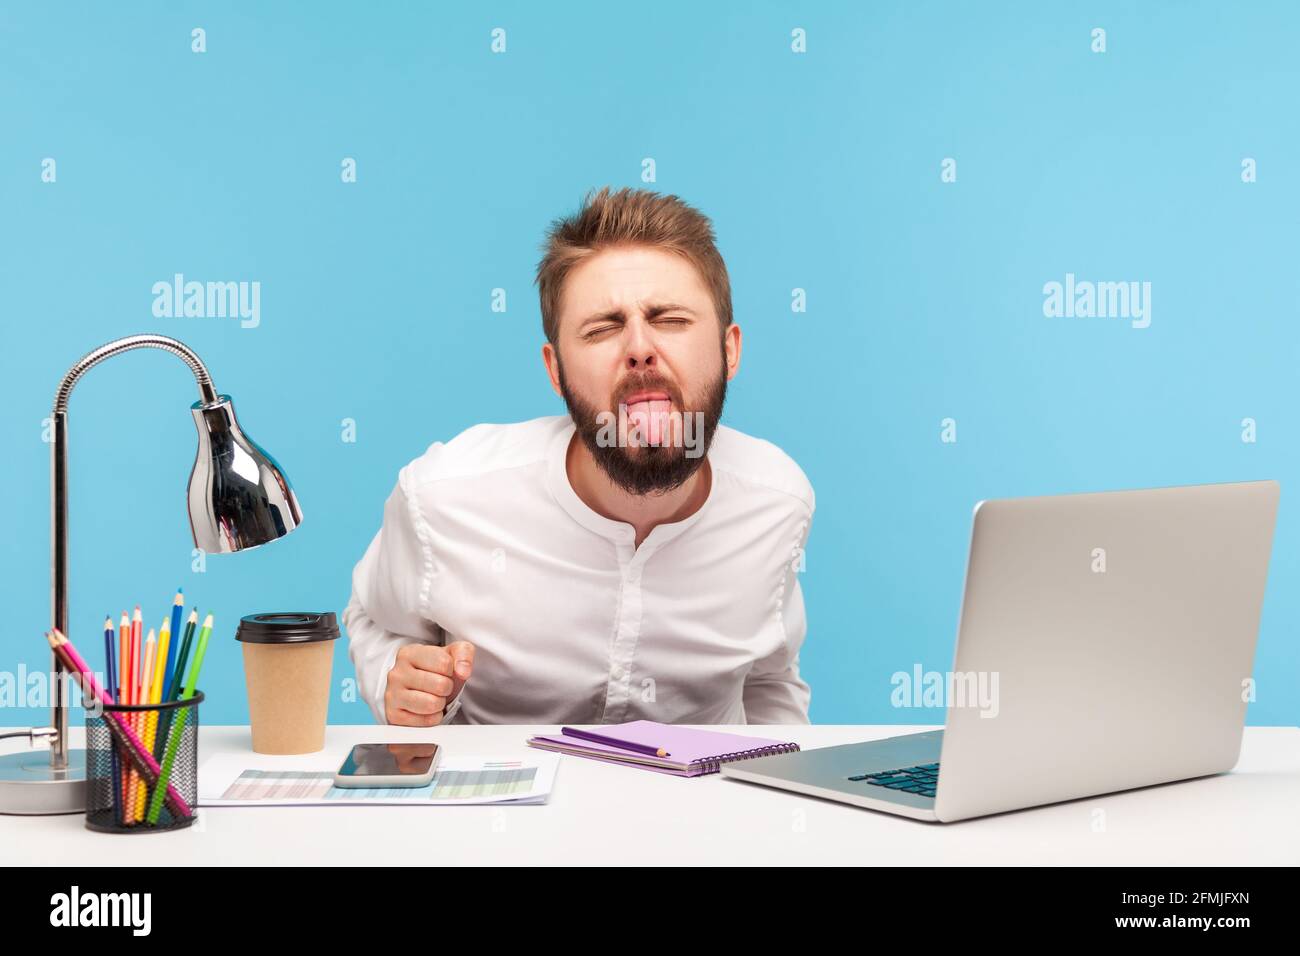 Crazy funny businessman sitting office workplace with laptop on desk, showing his tongue, looking at camera with naughty disobedient expression. Indoo Stock Photo